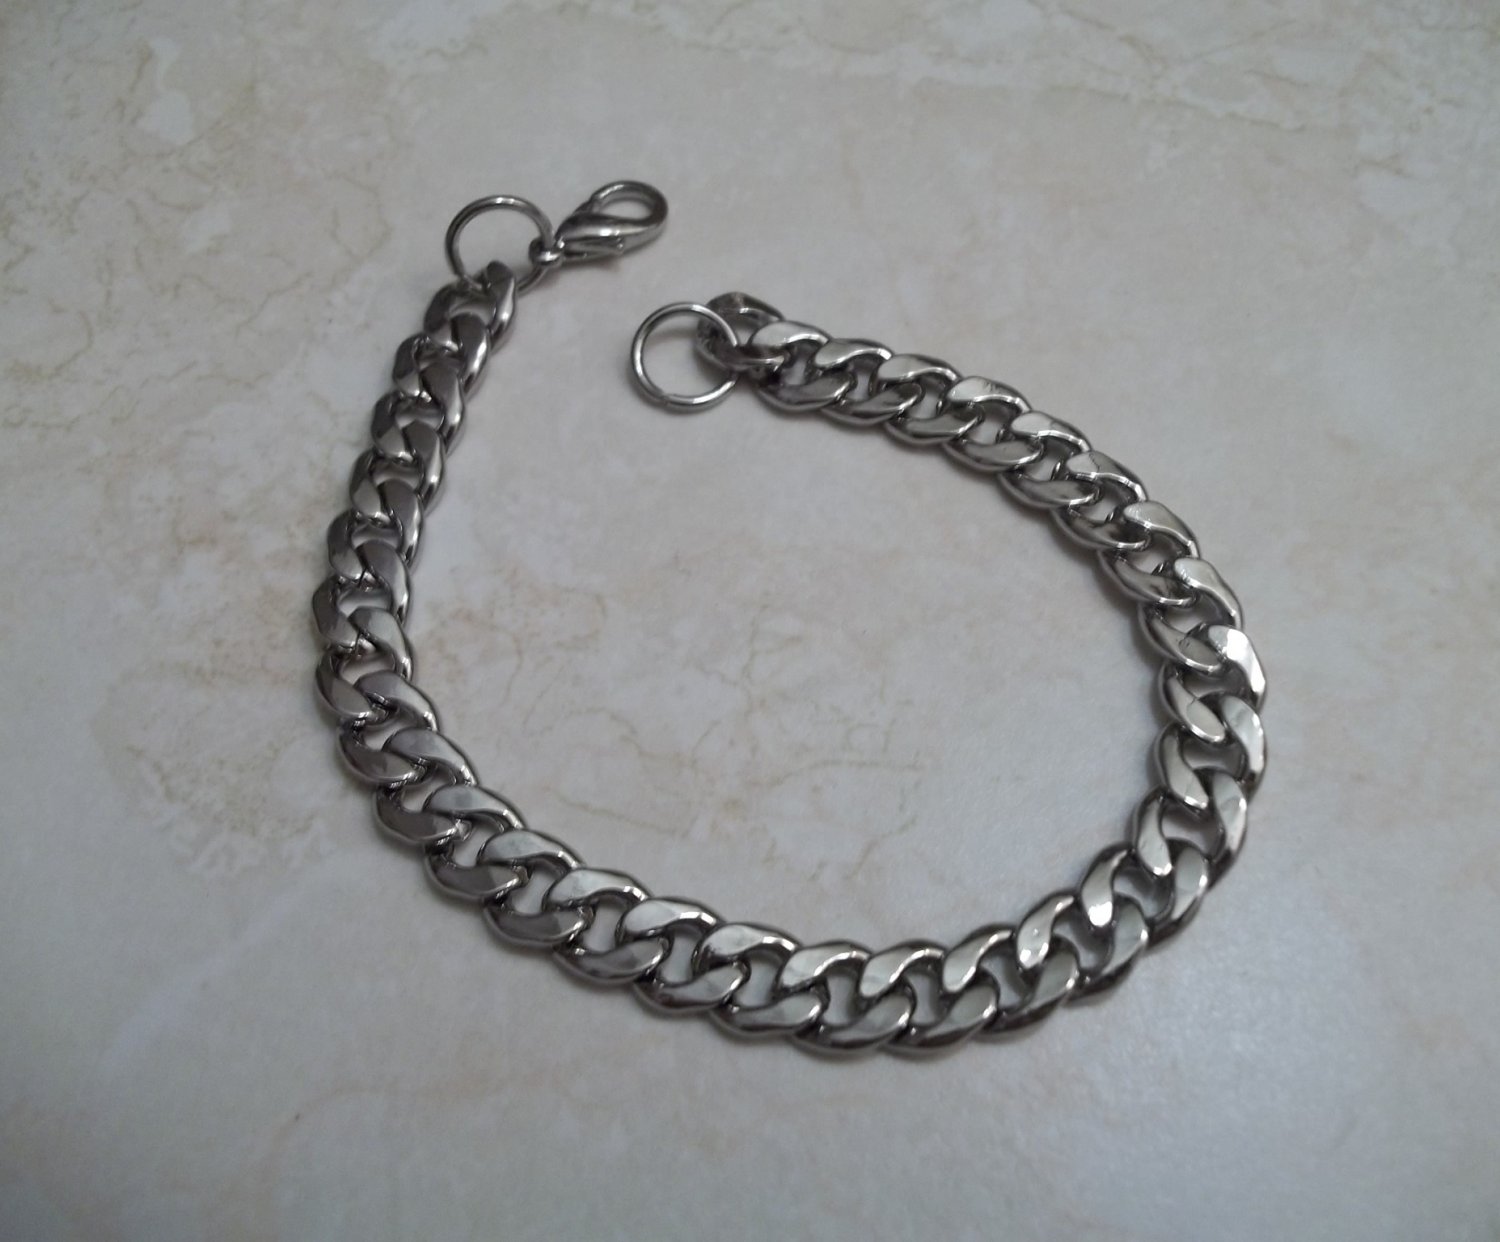 MENS STAINLESS STEEL CURB CHAIN BRACELET